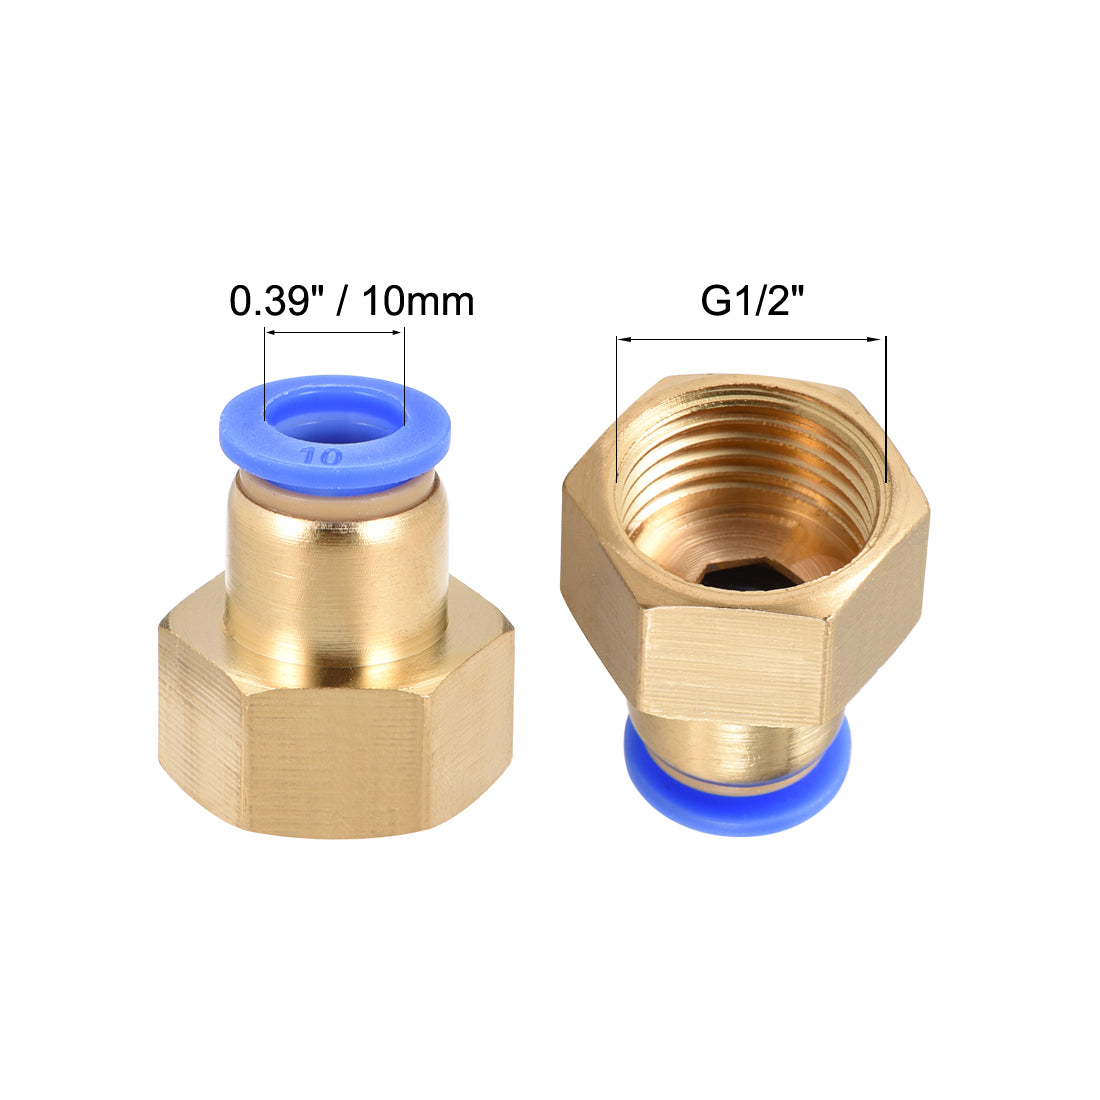 uxcell Uxcell Push to Connect Tube Fitting Adapter 10mm OD x G1/2" Female 2pcs